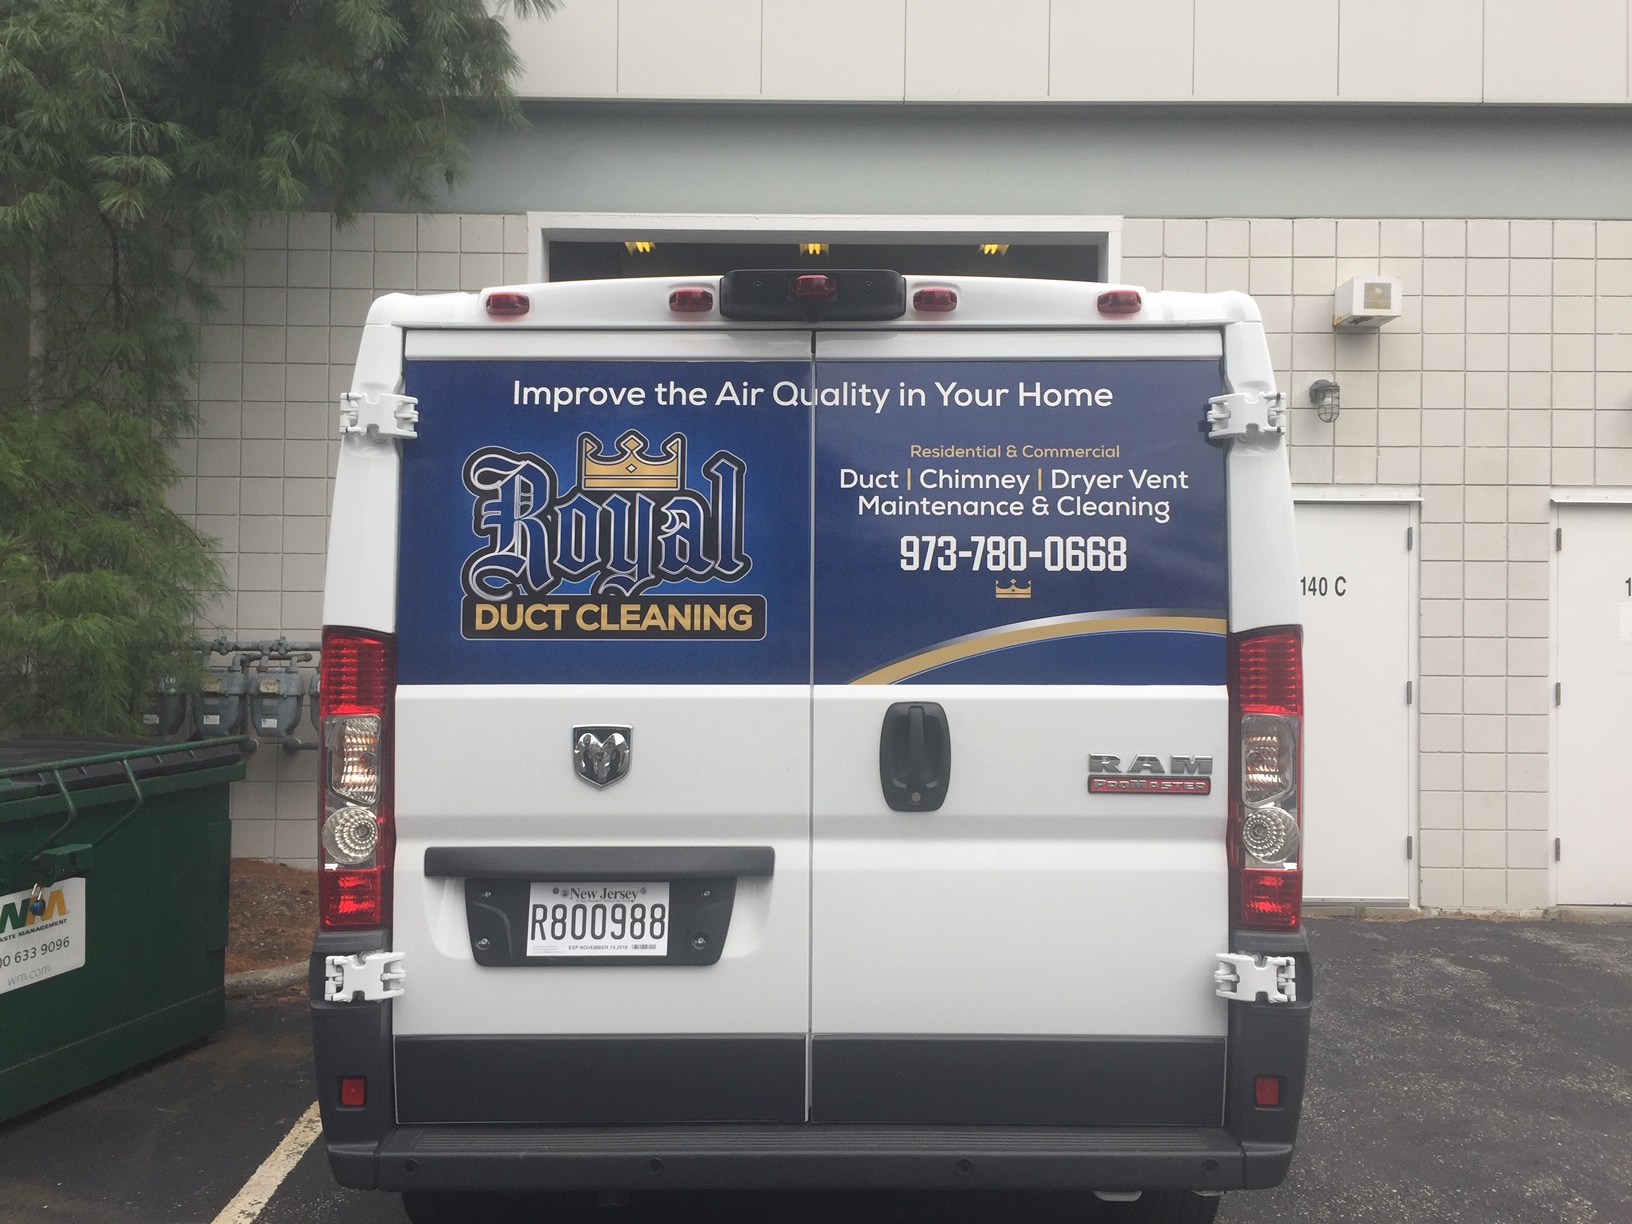 Back of white van with blue wrap that says Royal Duct Cleaning and Improve the Air Quality in Your Home.